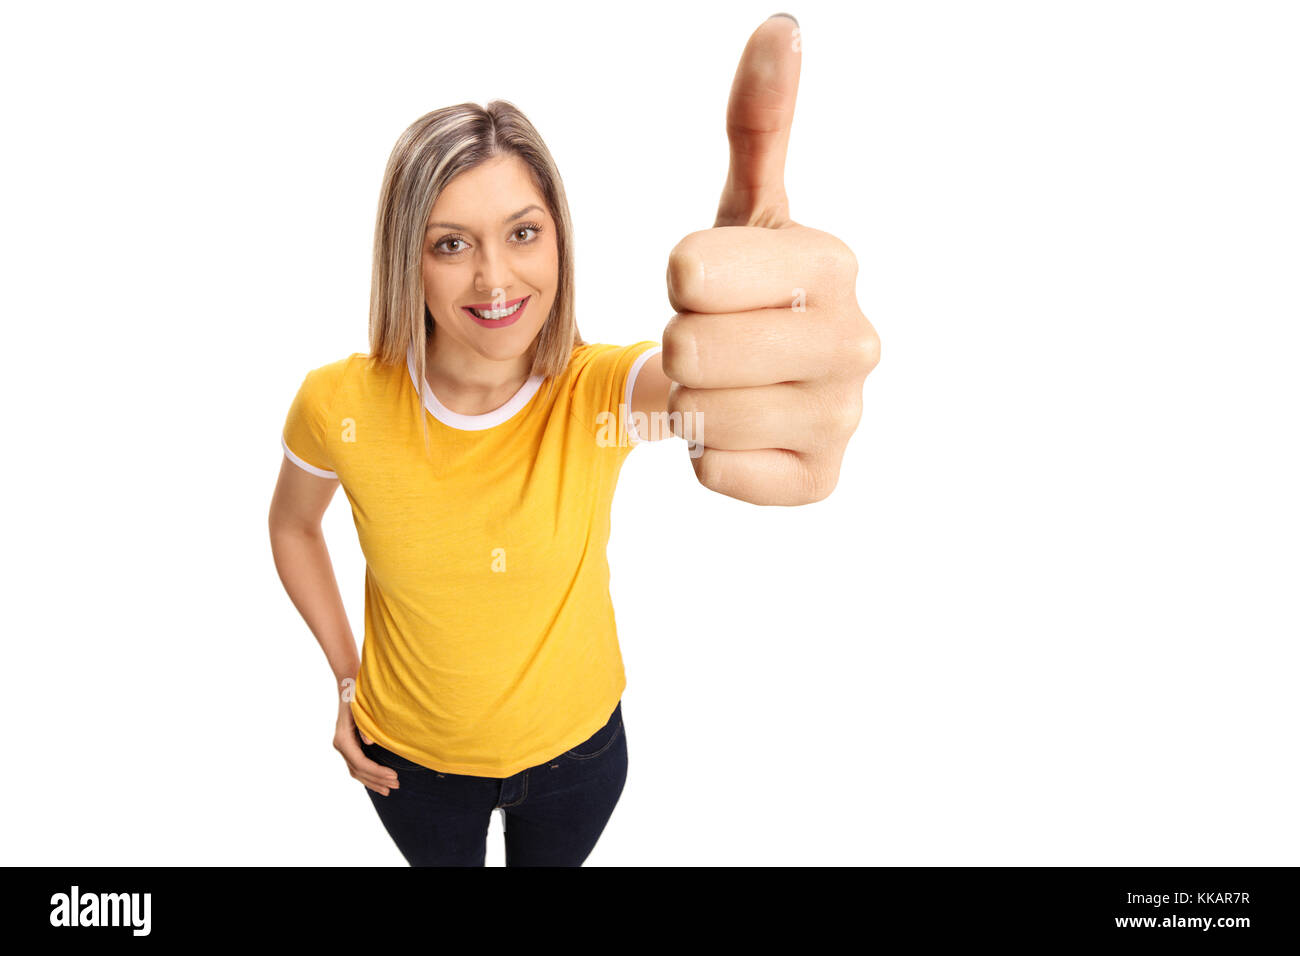 Young woman making a thumb up gesture and smiling isolated on white background Stock Photo